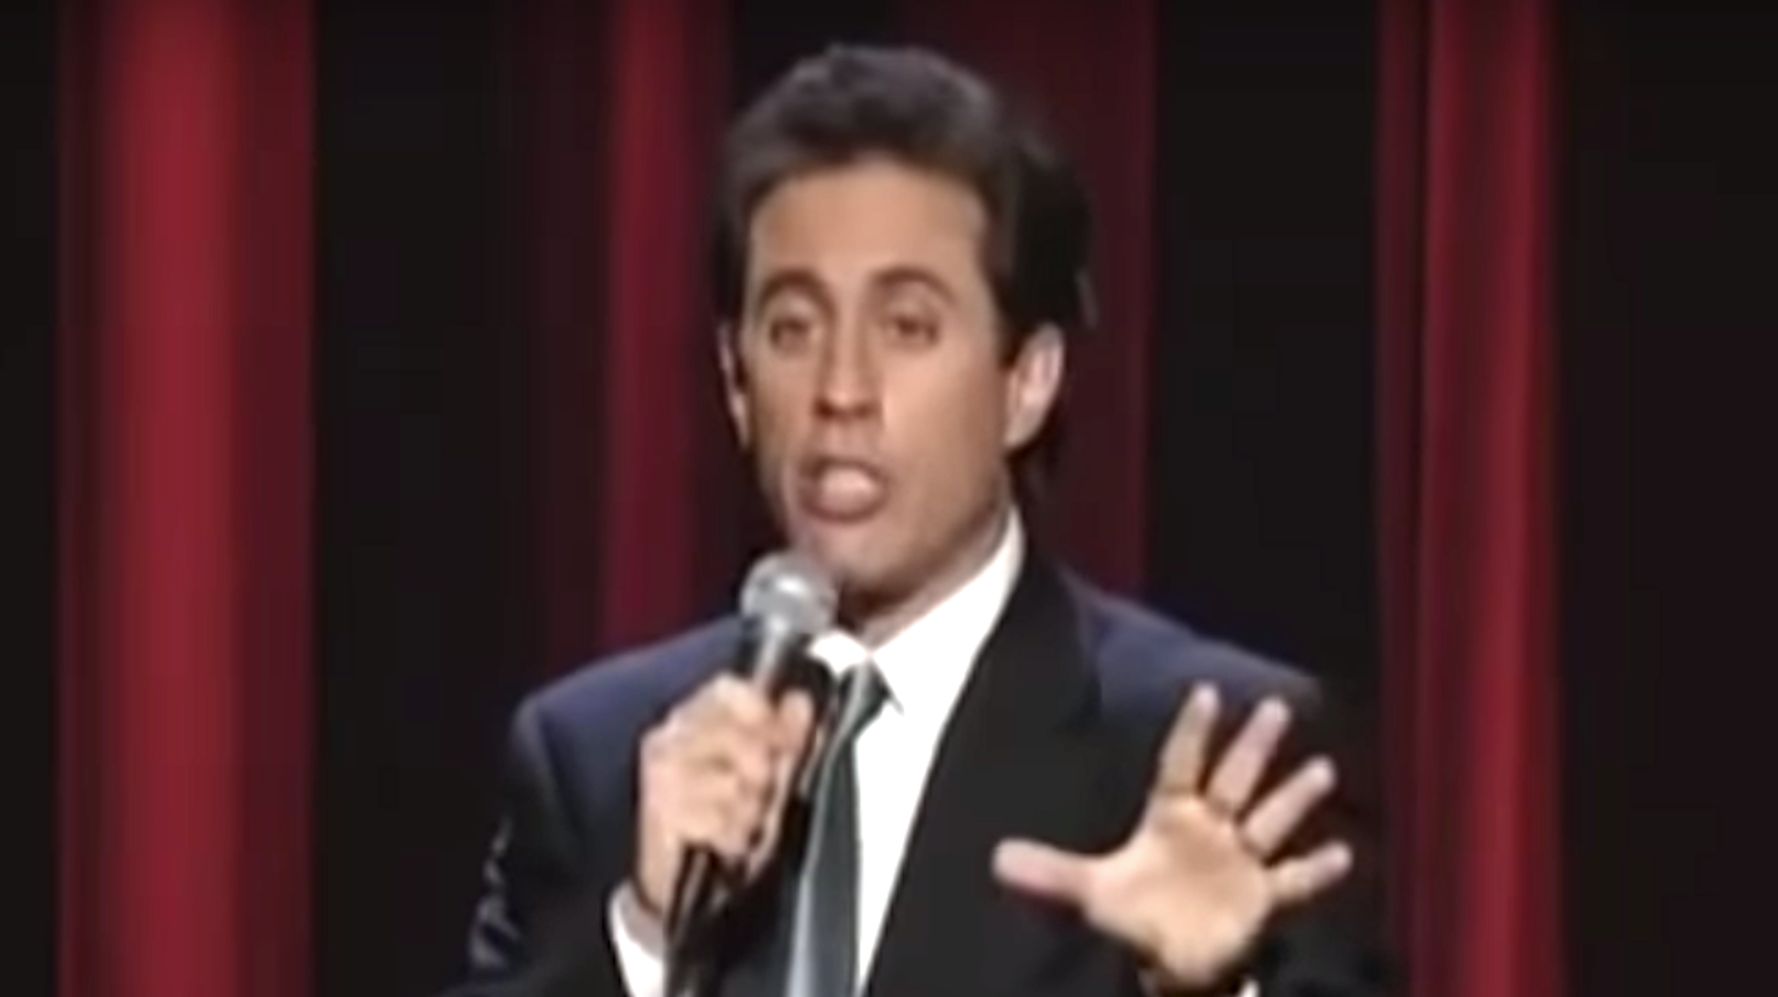 Jerry Seinfeld Names The 1 Olympic Medal He'd Never Want In Old Bit Going Viral